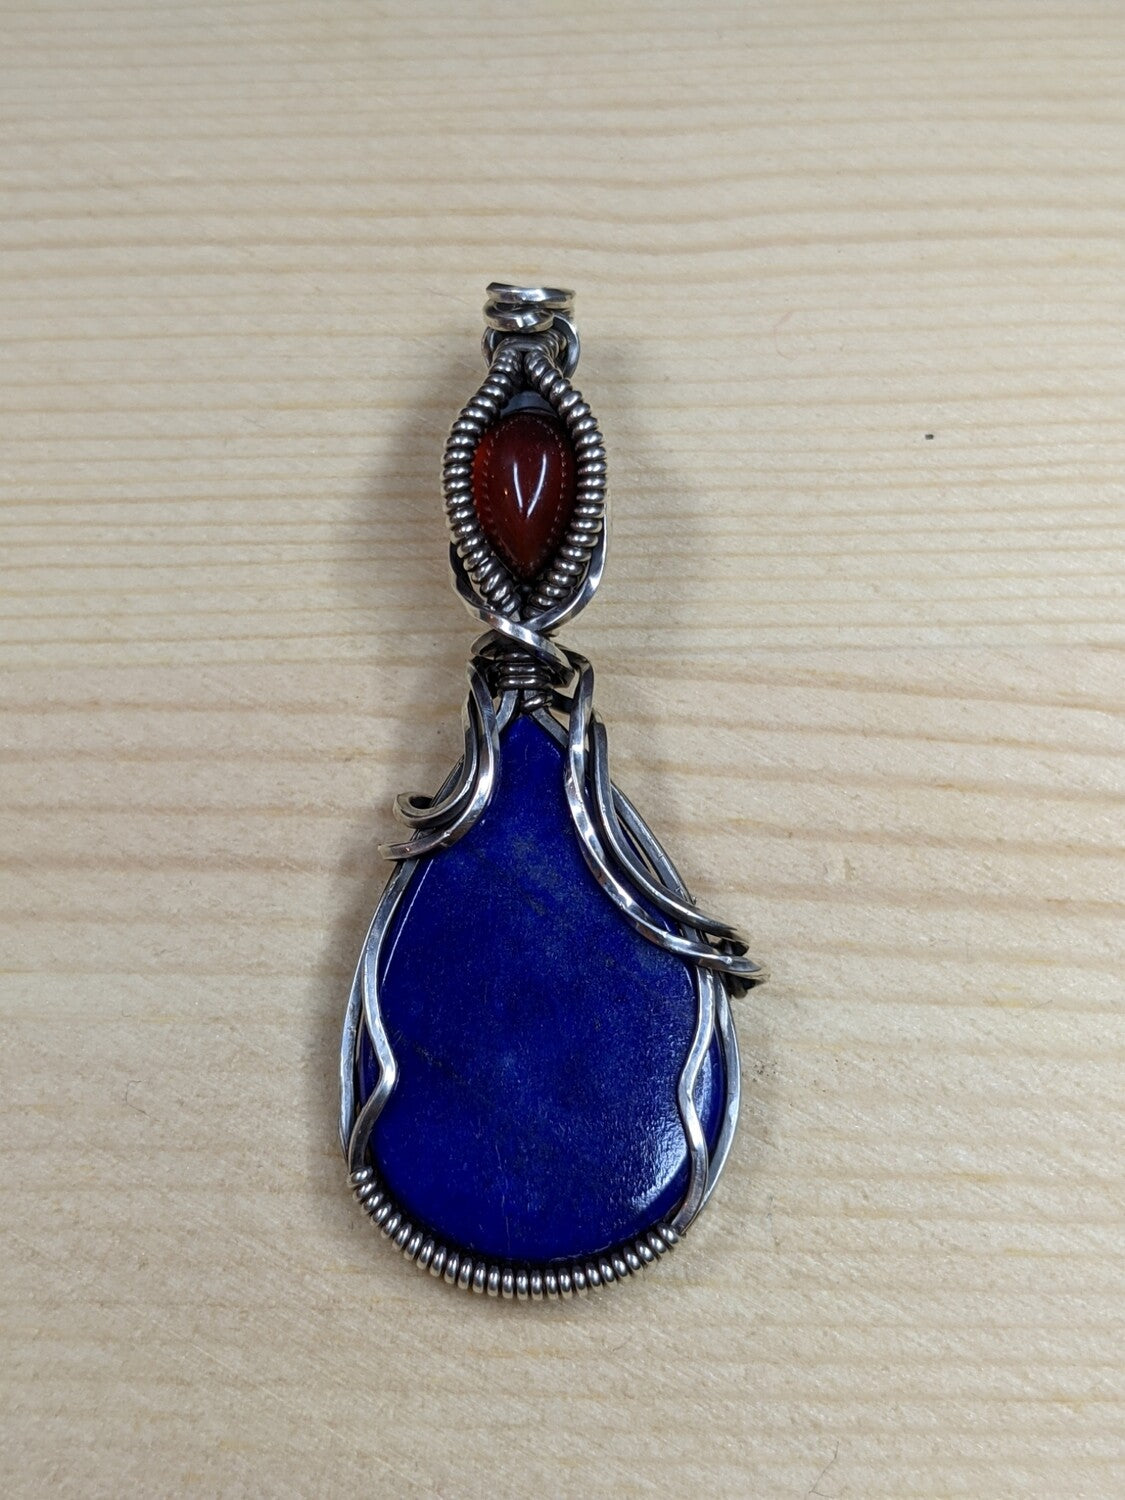 Lapis Lazuli and Carnelian Onyx in Sterling Silver